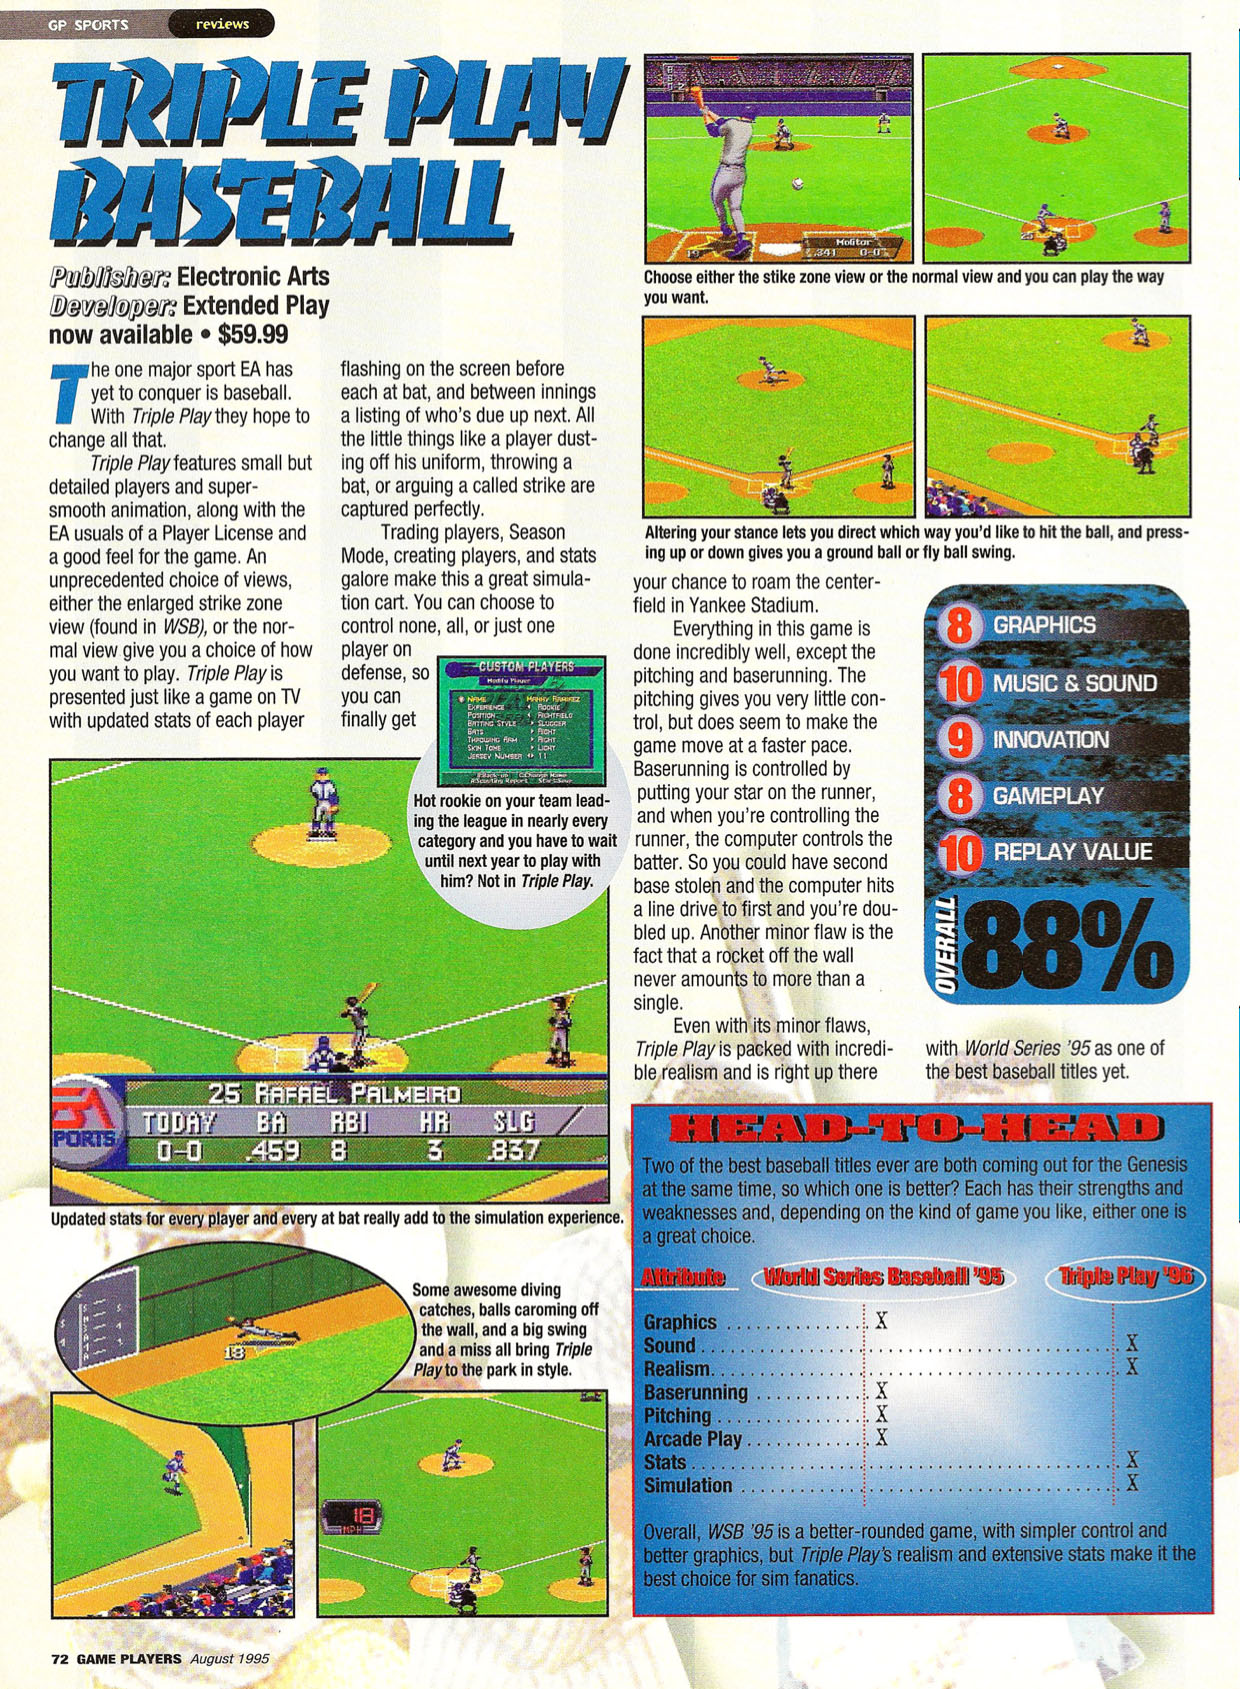 Triple Play Baseball Review, Game Players August 1995 page 72